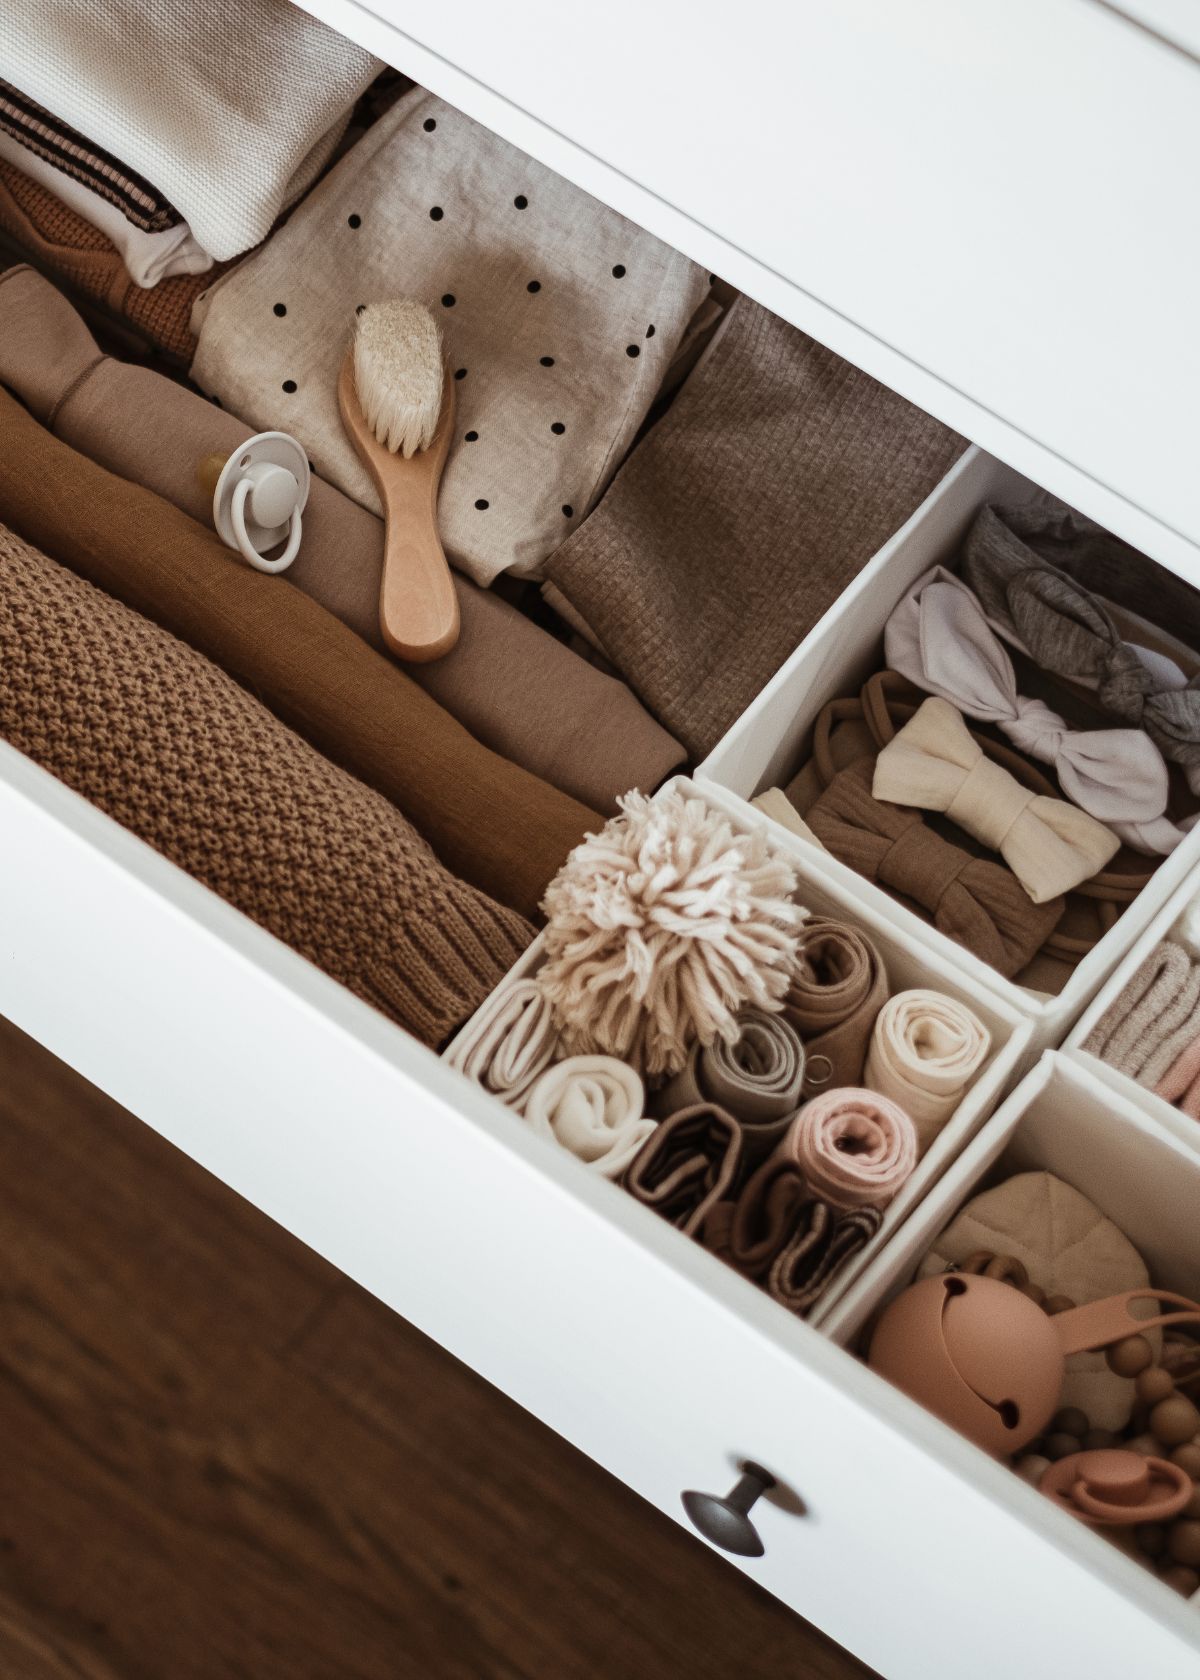 How to Organize a Baby Dresser